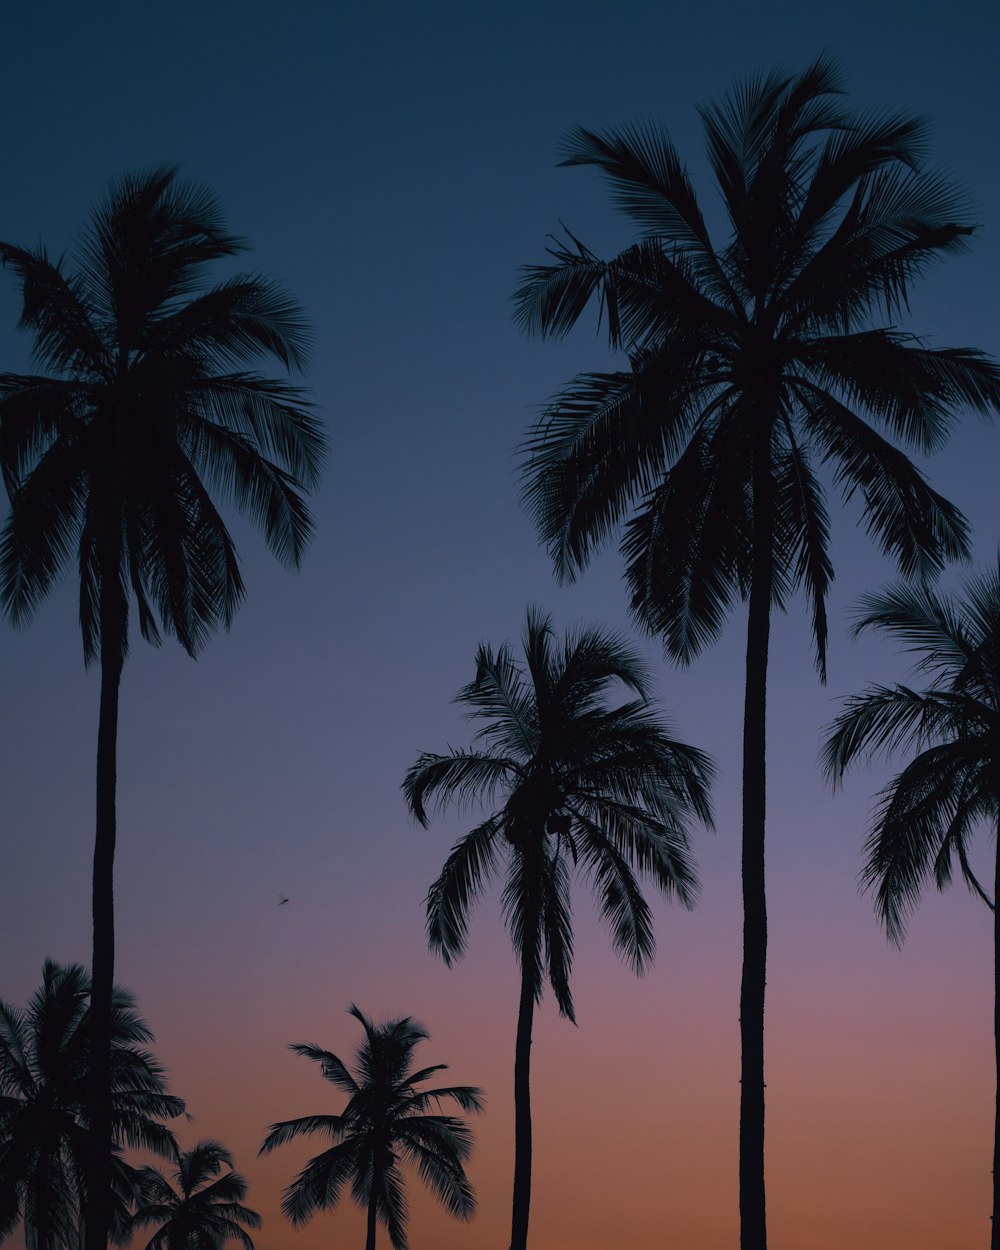 palm trees are silhouetted against a purple and blue sky